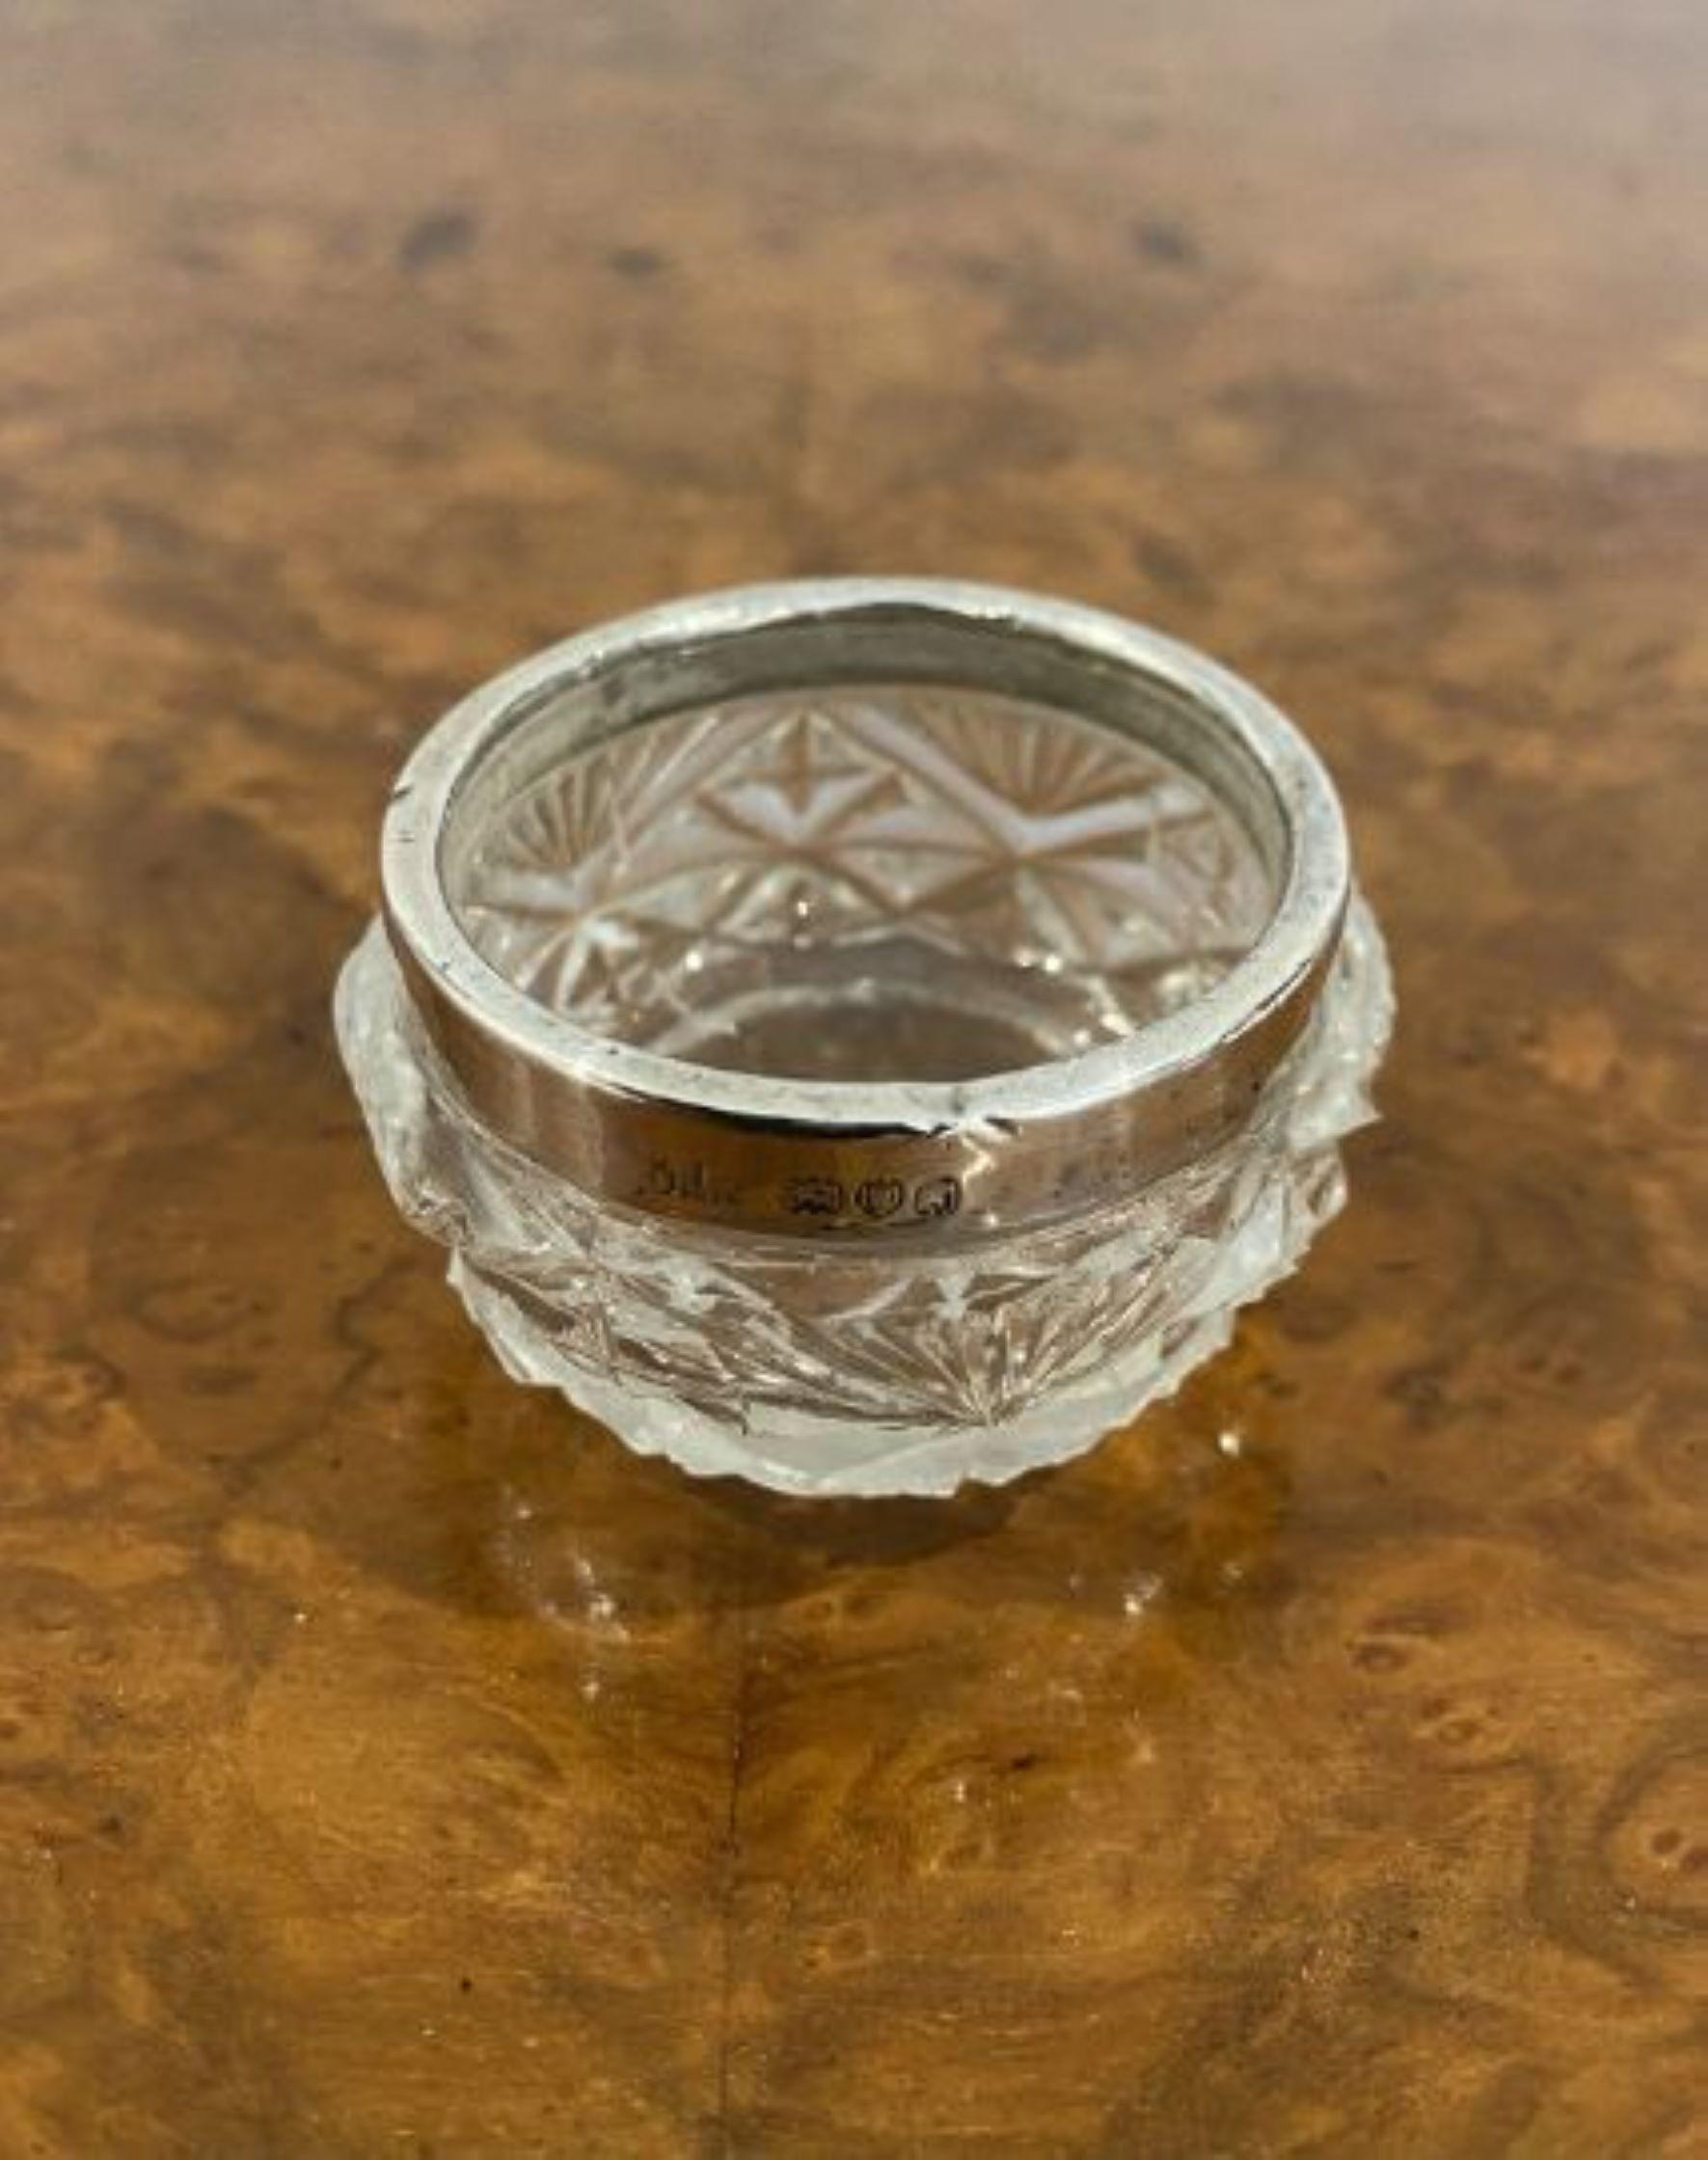 Pair of quality antique Edwardian quality hall marked silver top table salts, having quality cut bowls with solid silver tops.